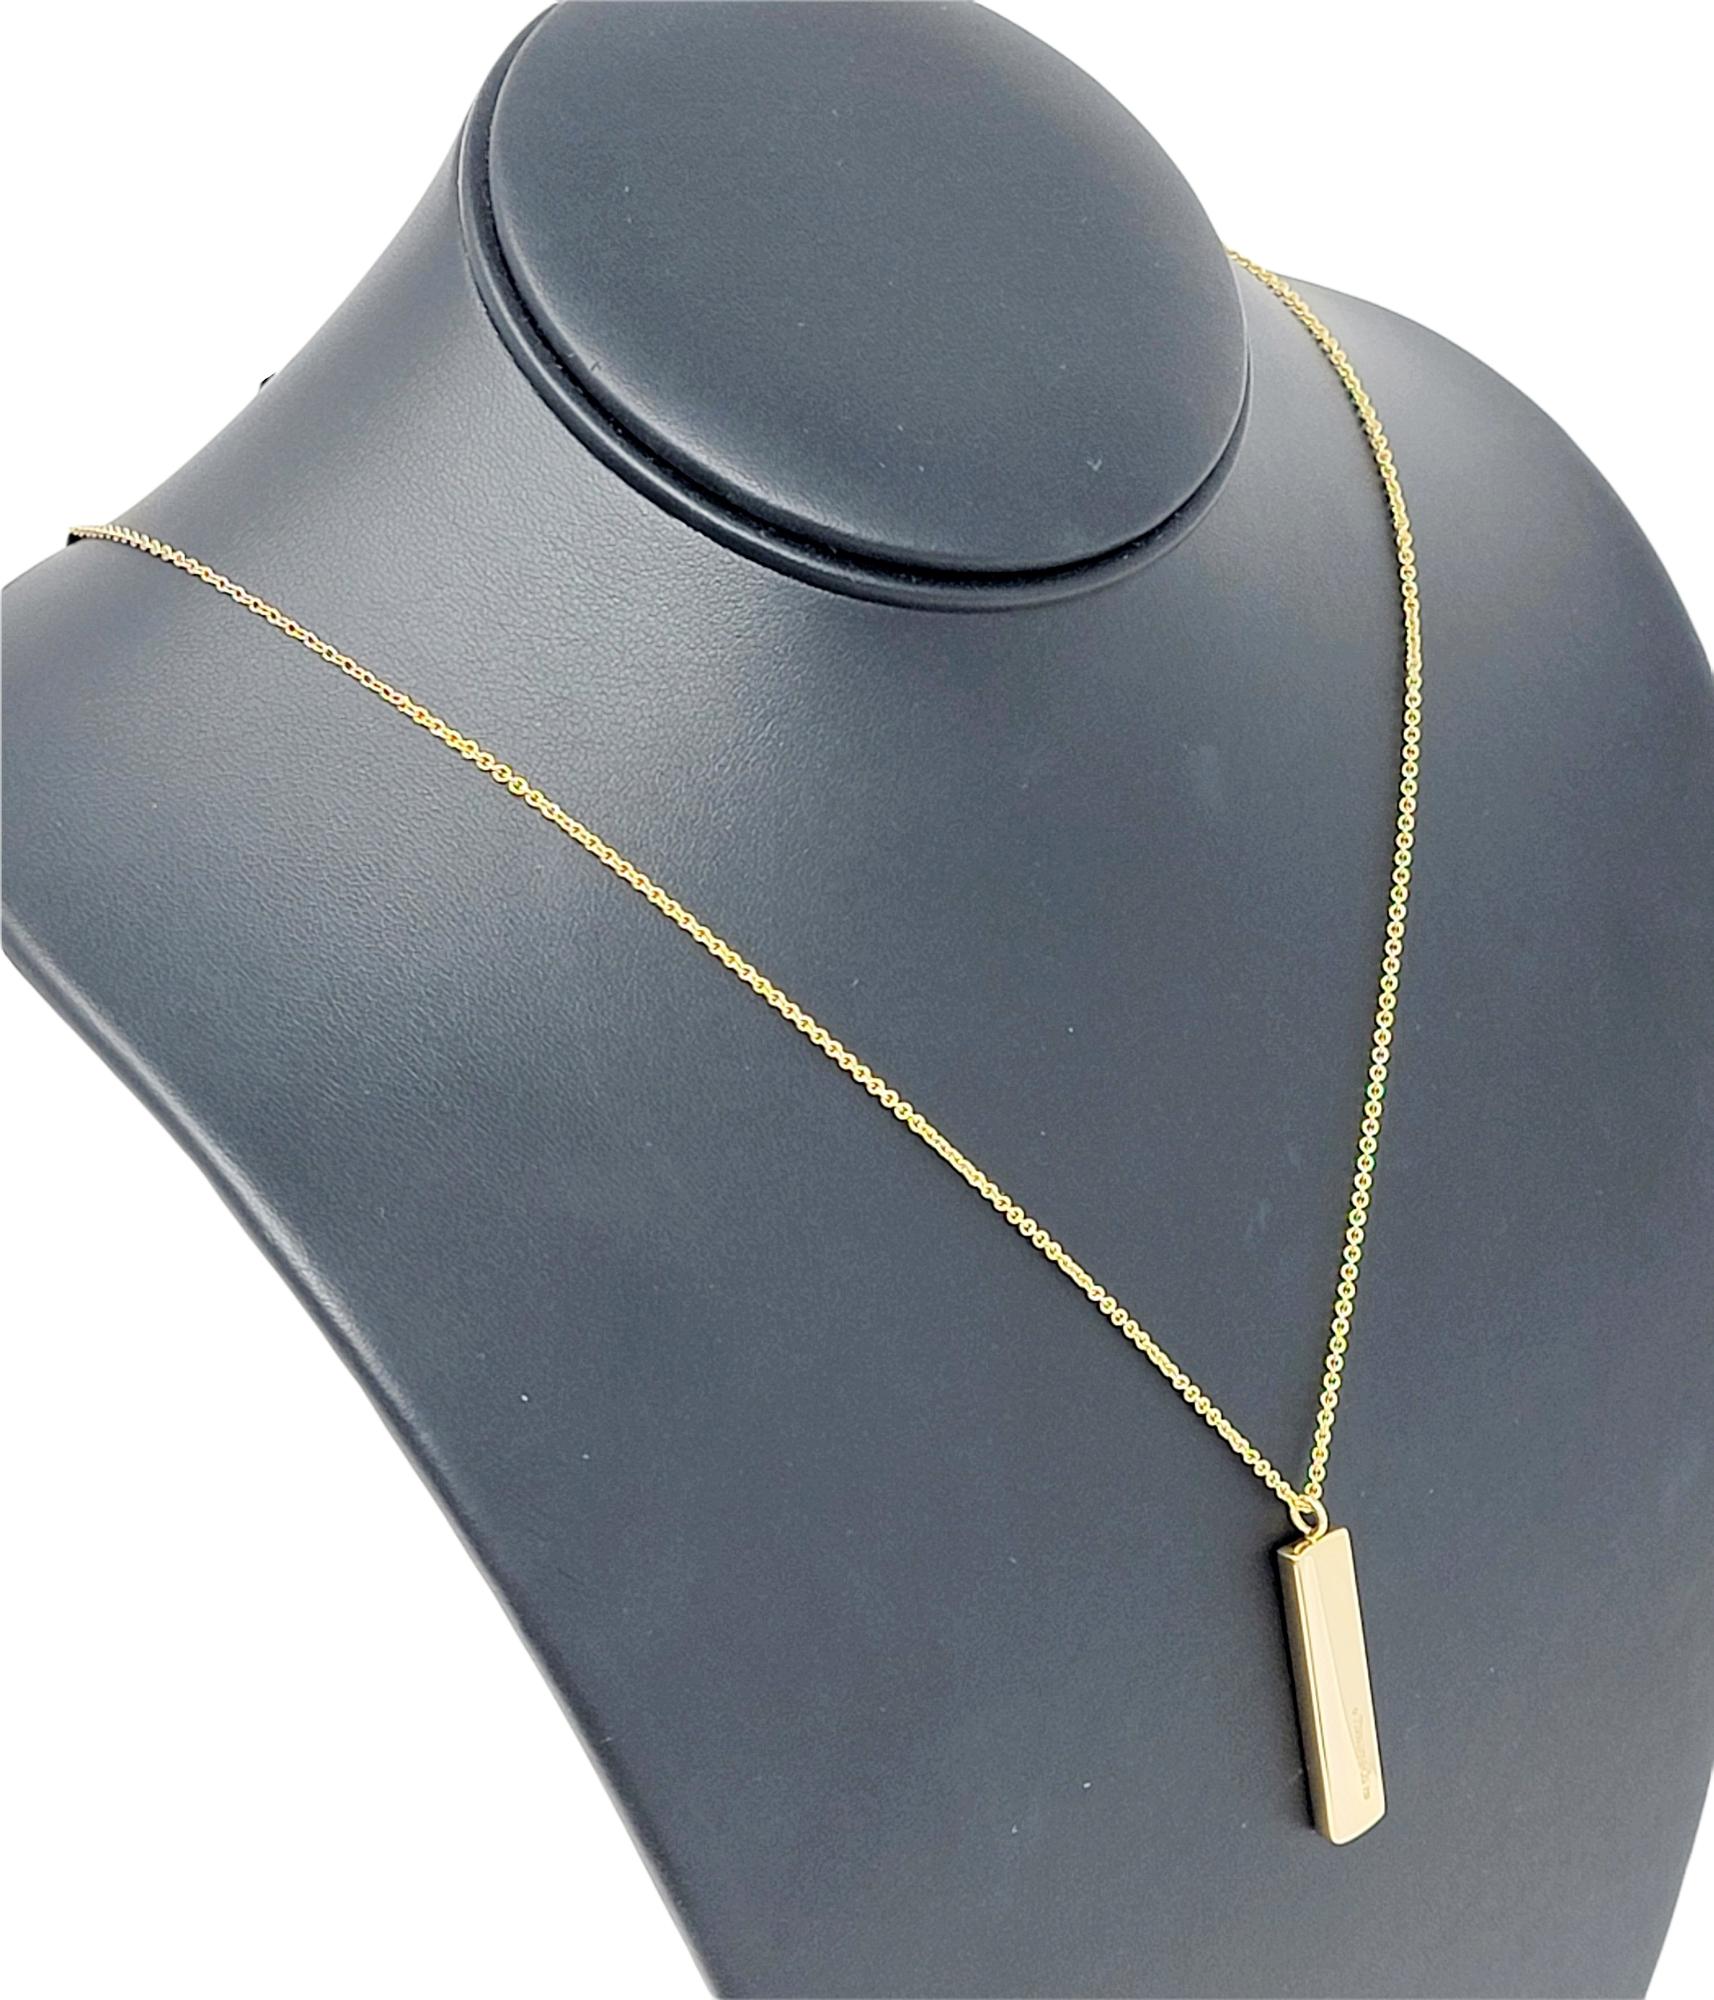 Tiffany & Co. 1837 Vertical Bar Pendant Necklace in 18 Karat Yellow Gold 3